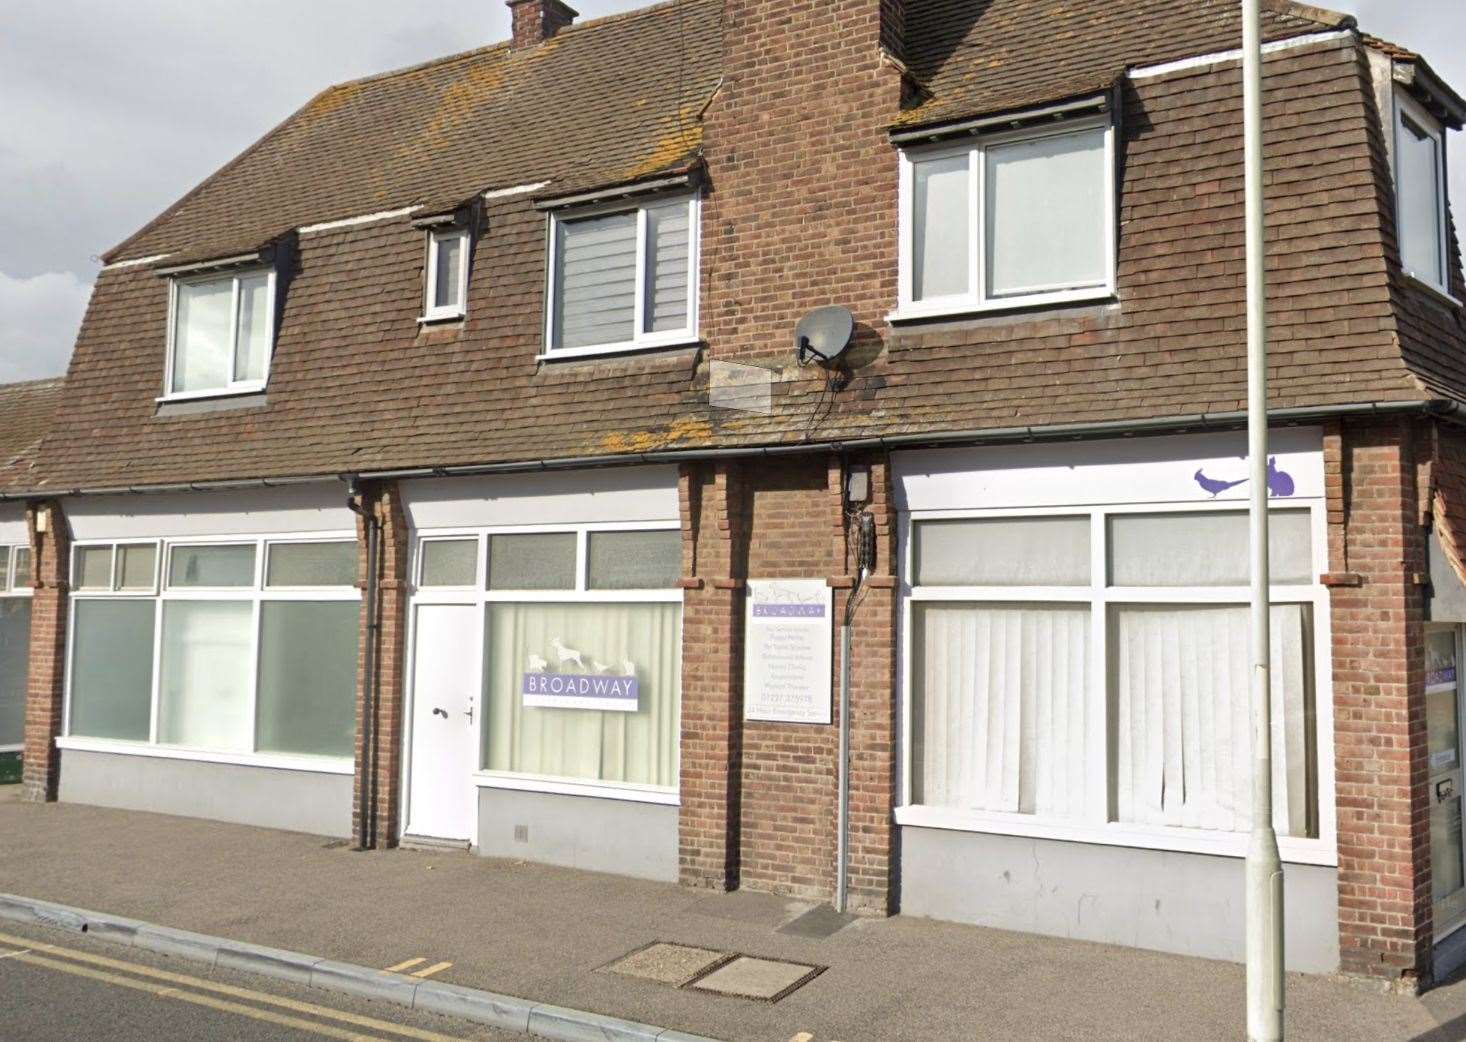 Broadway Veterinarian Group's surgery in The Broadway, Herne Bay. Pic: Google